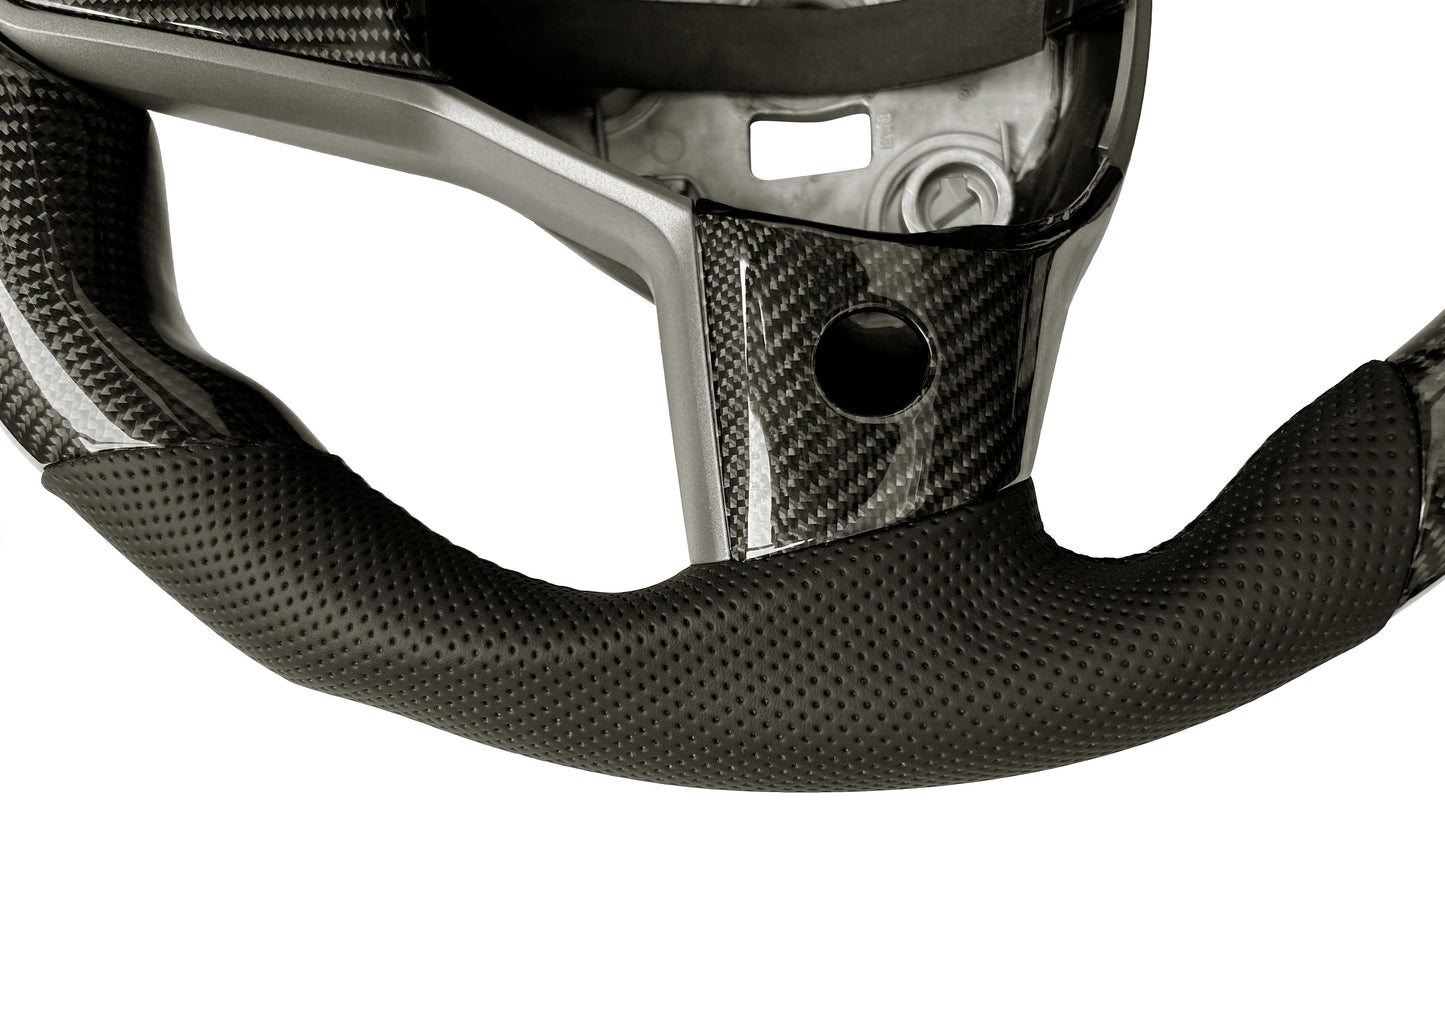 Perforated Leather, Glossy Carbon Fiber Steering Wheel Model 3/Y